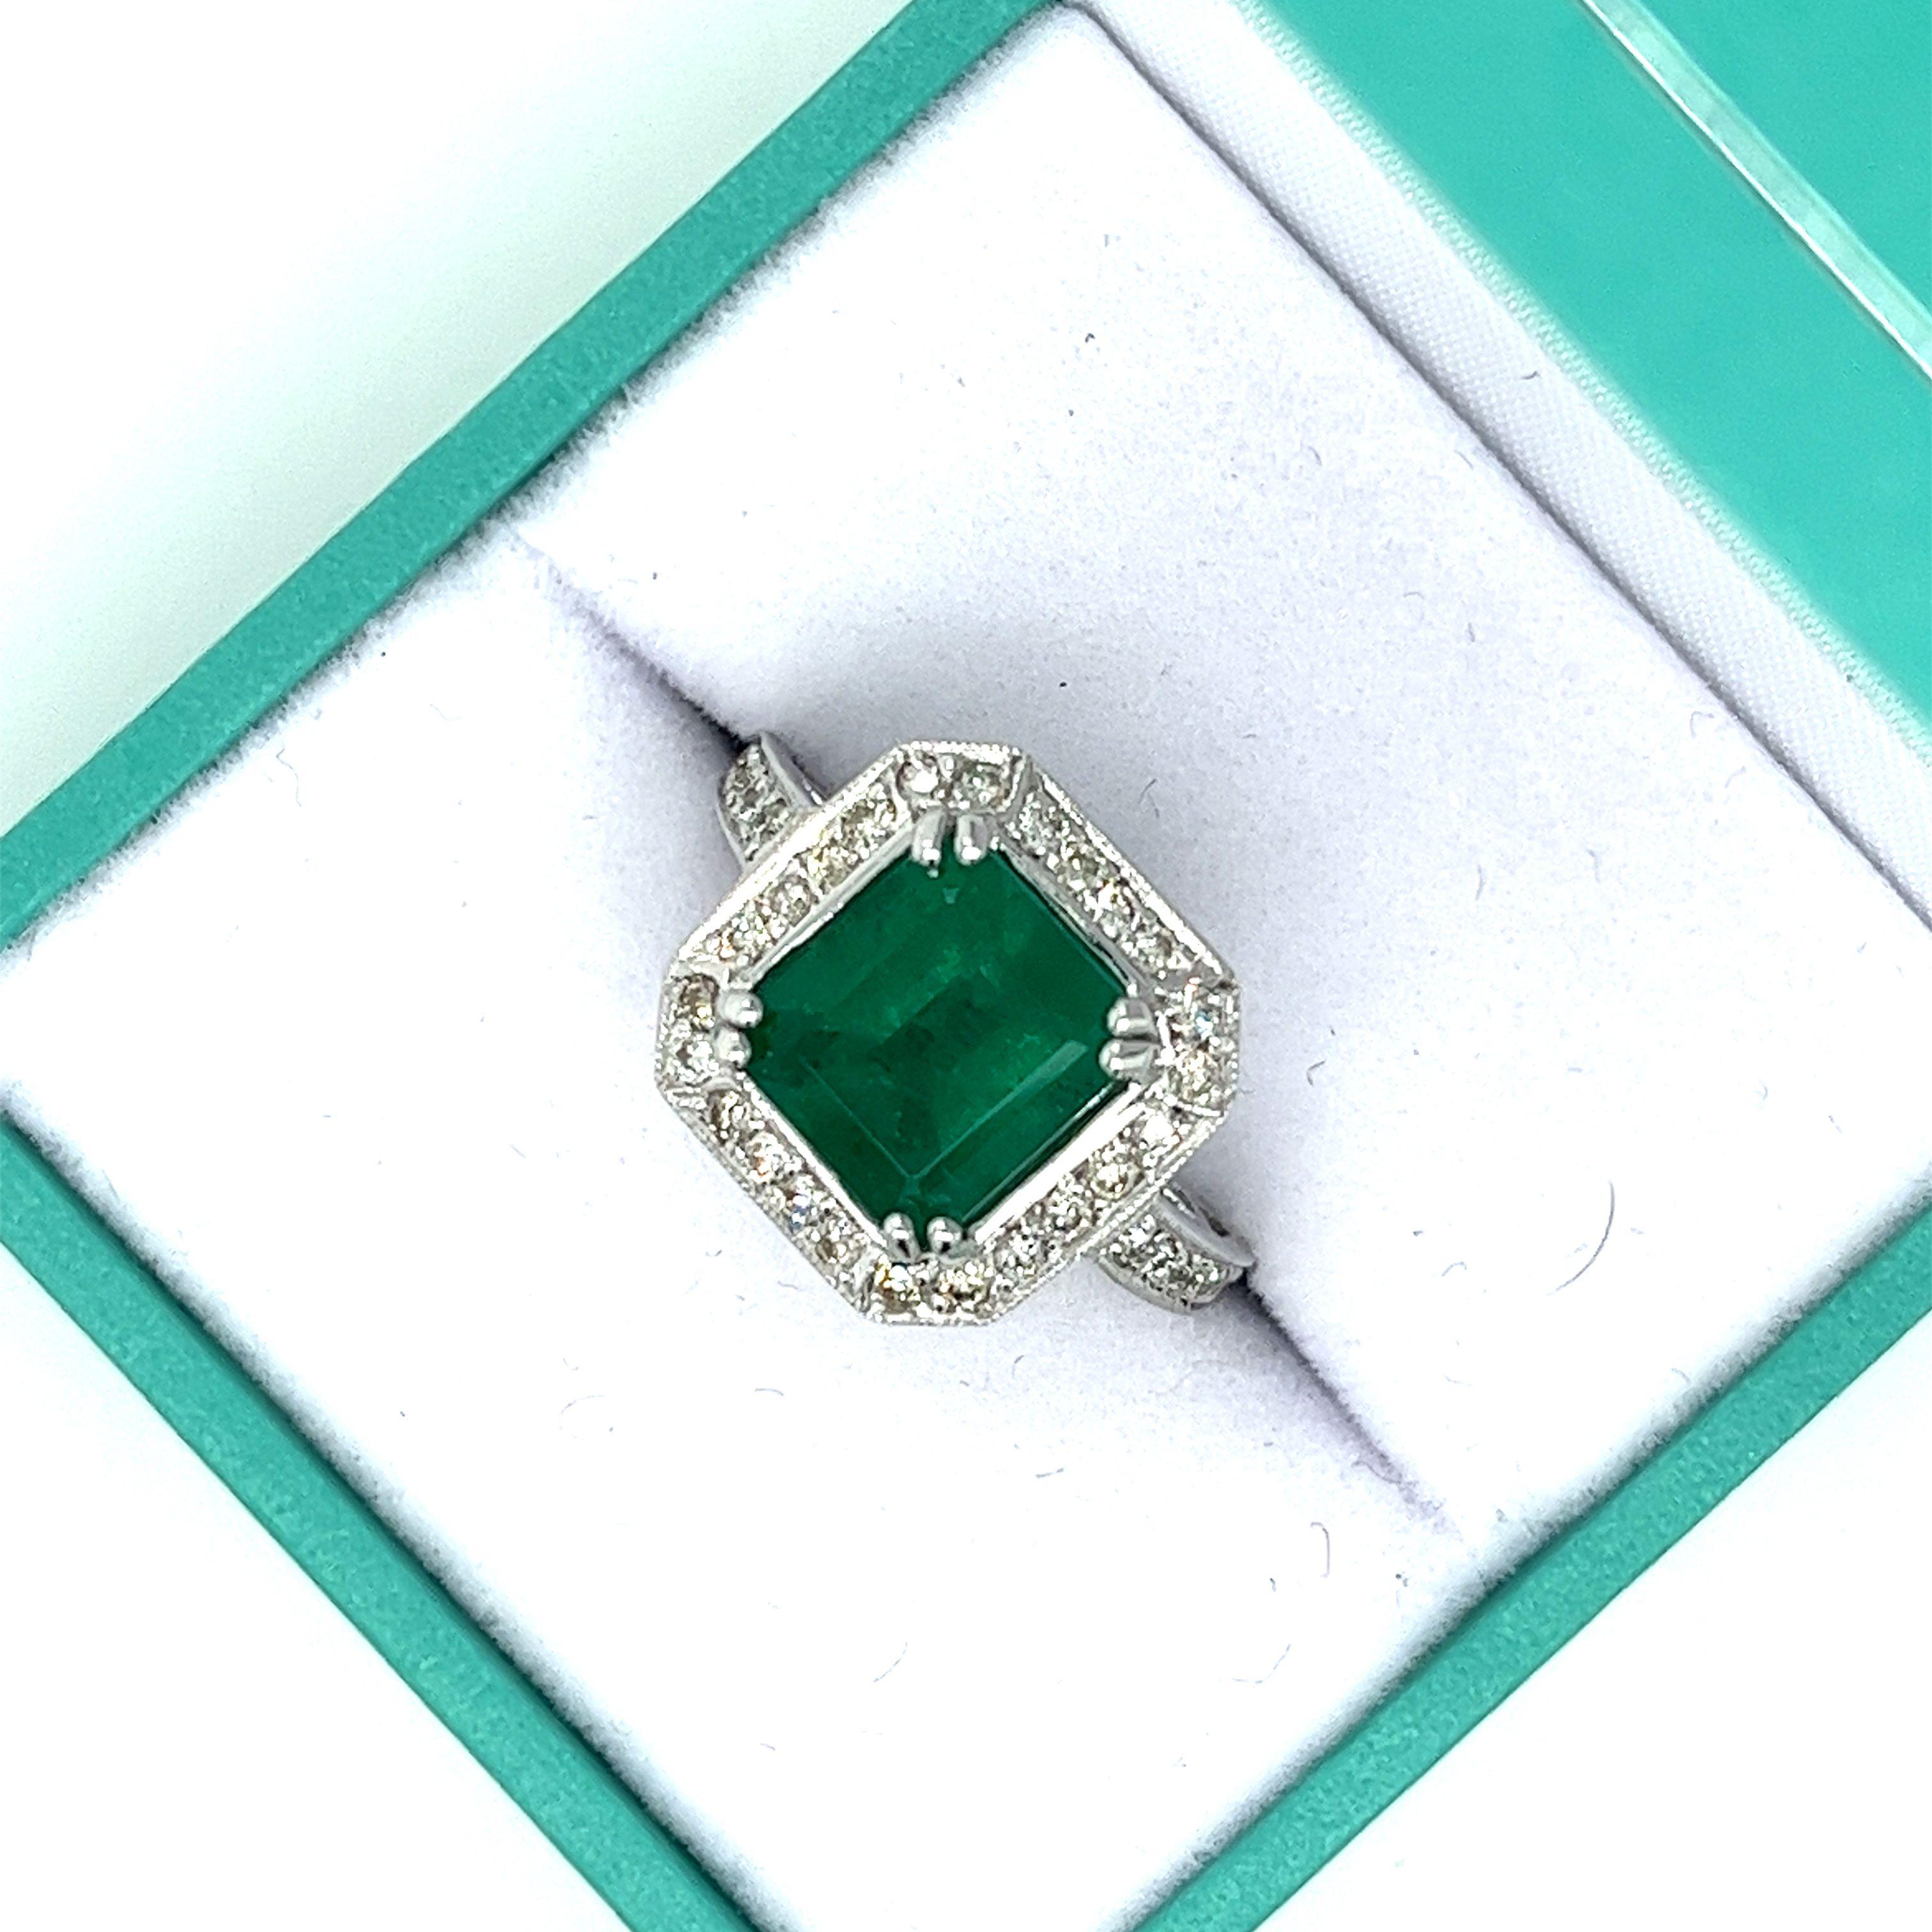 3 Carat Colombian Emerald in 18K White Gold Ring & Round Cut Diamond Halo In New Condition For Sale In Miami, FL